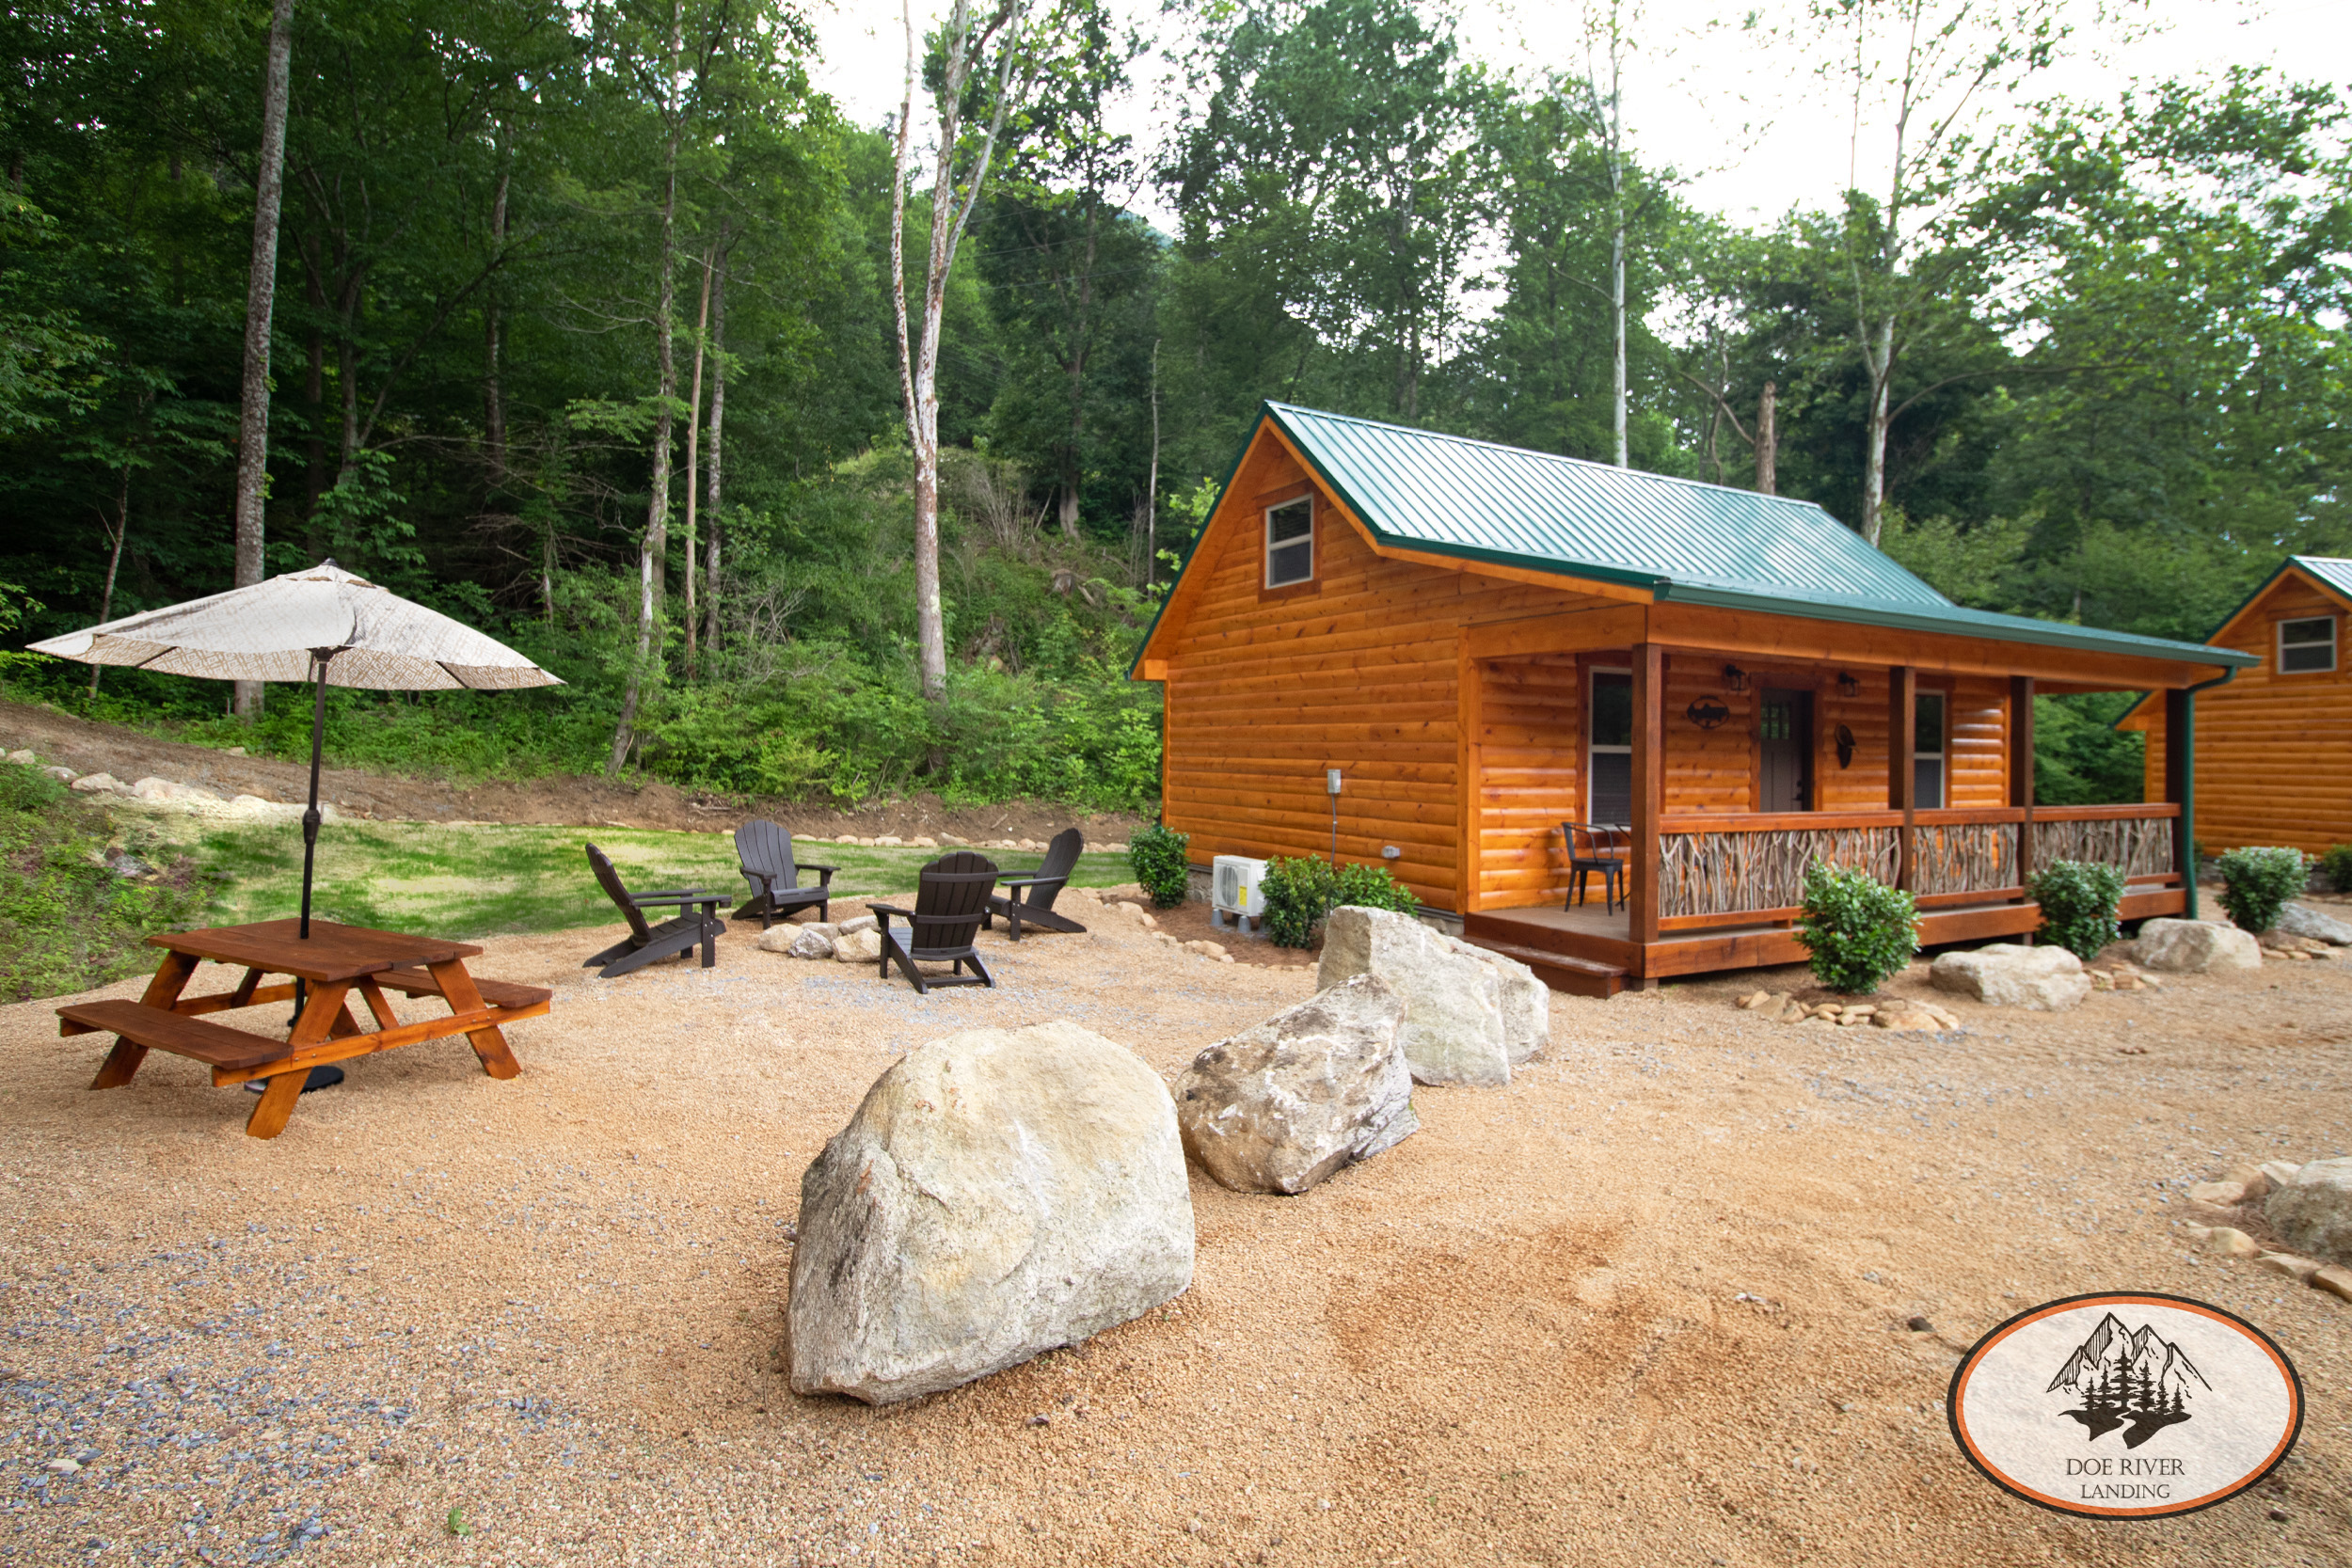 Doe River Landing campground in Roan Mountain, TN. Best vacation rental near Elizabethton, TN and Johnson City TN. Rainbow Trout Cabin private riverside campsite with fire pit, picnic table, grill, and umbrella